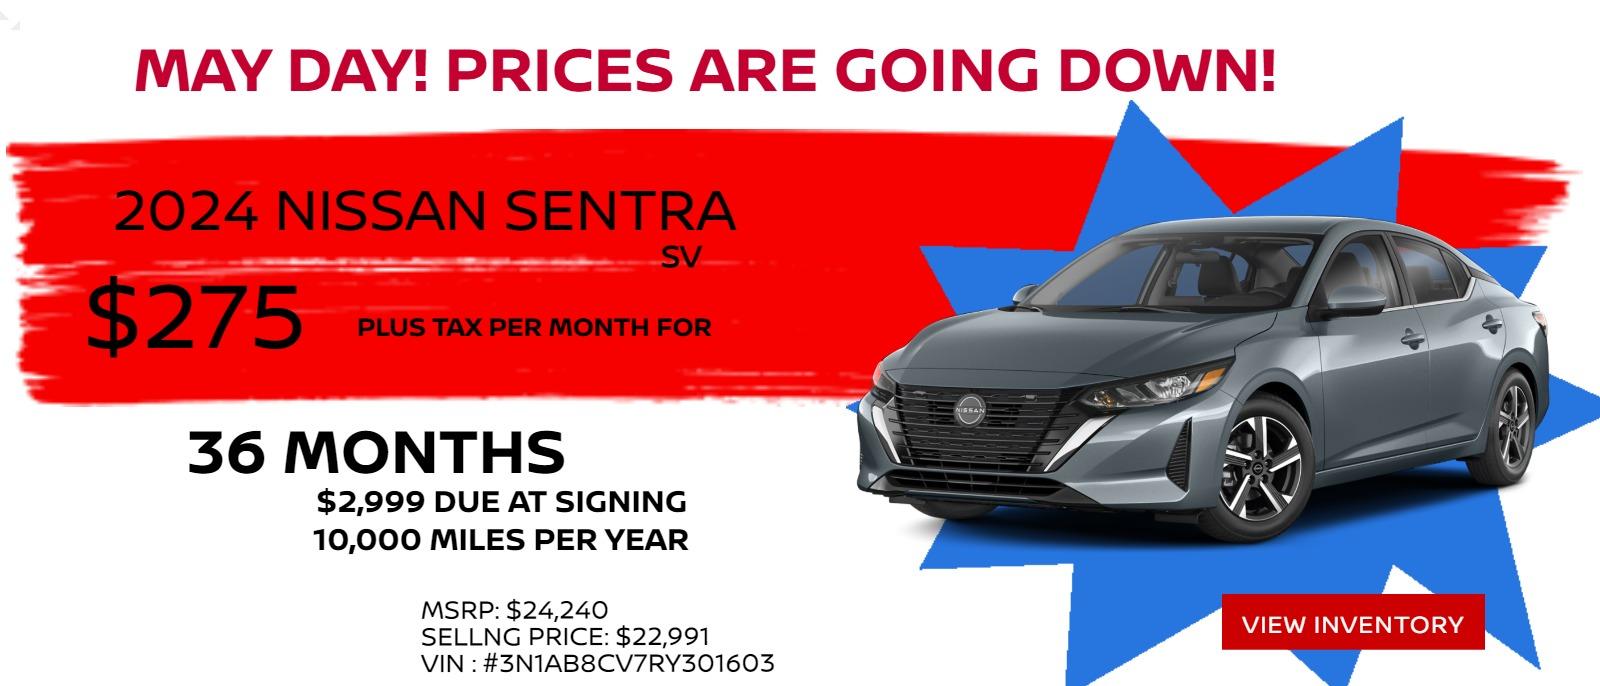 2024 NISSAN SENTRA SV

LEASE FOR $275 PER MONTH
FOR 36 MONTHS
$2,999 DUE AT SIGNING

MSRP: $24240
SELLNG PRICE: $22991.00

STOCK # 24196
VIN # 3N1AB8CV7RY301603